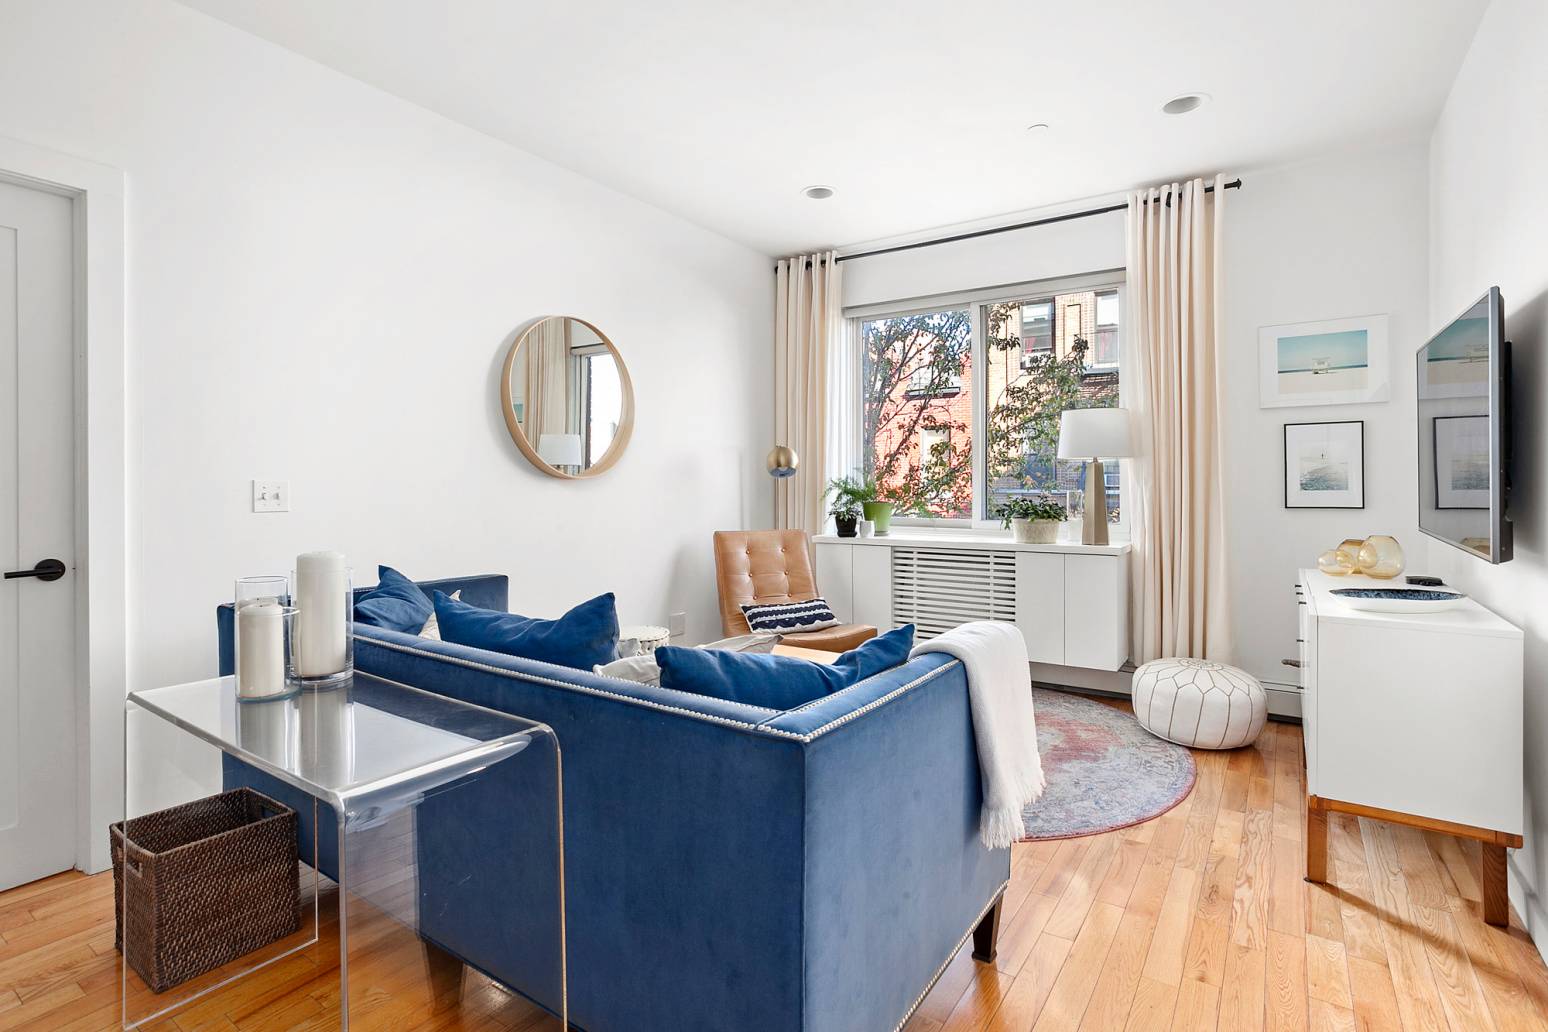 Efficiently spacious, this true 2 bedroom 2 full bathroom puts you in the heart of Williamsburg.